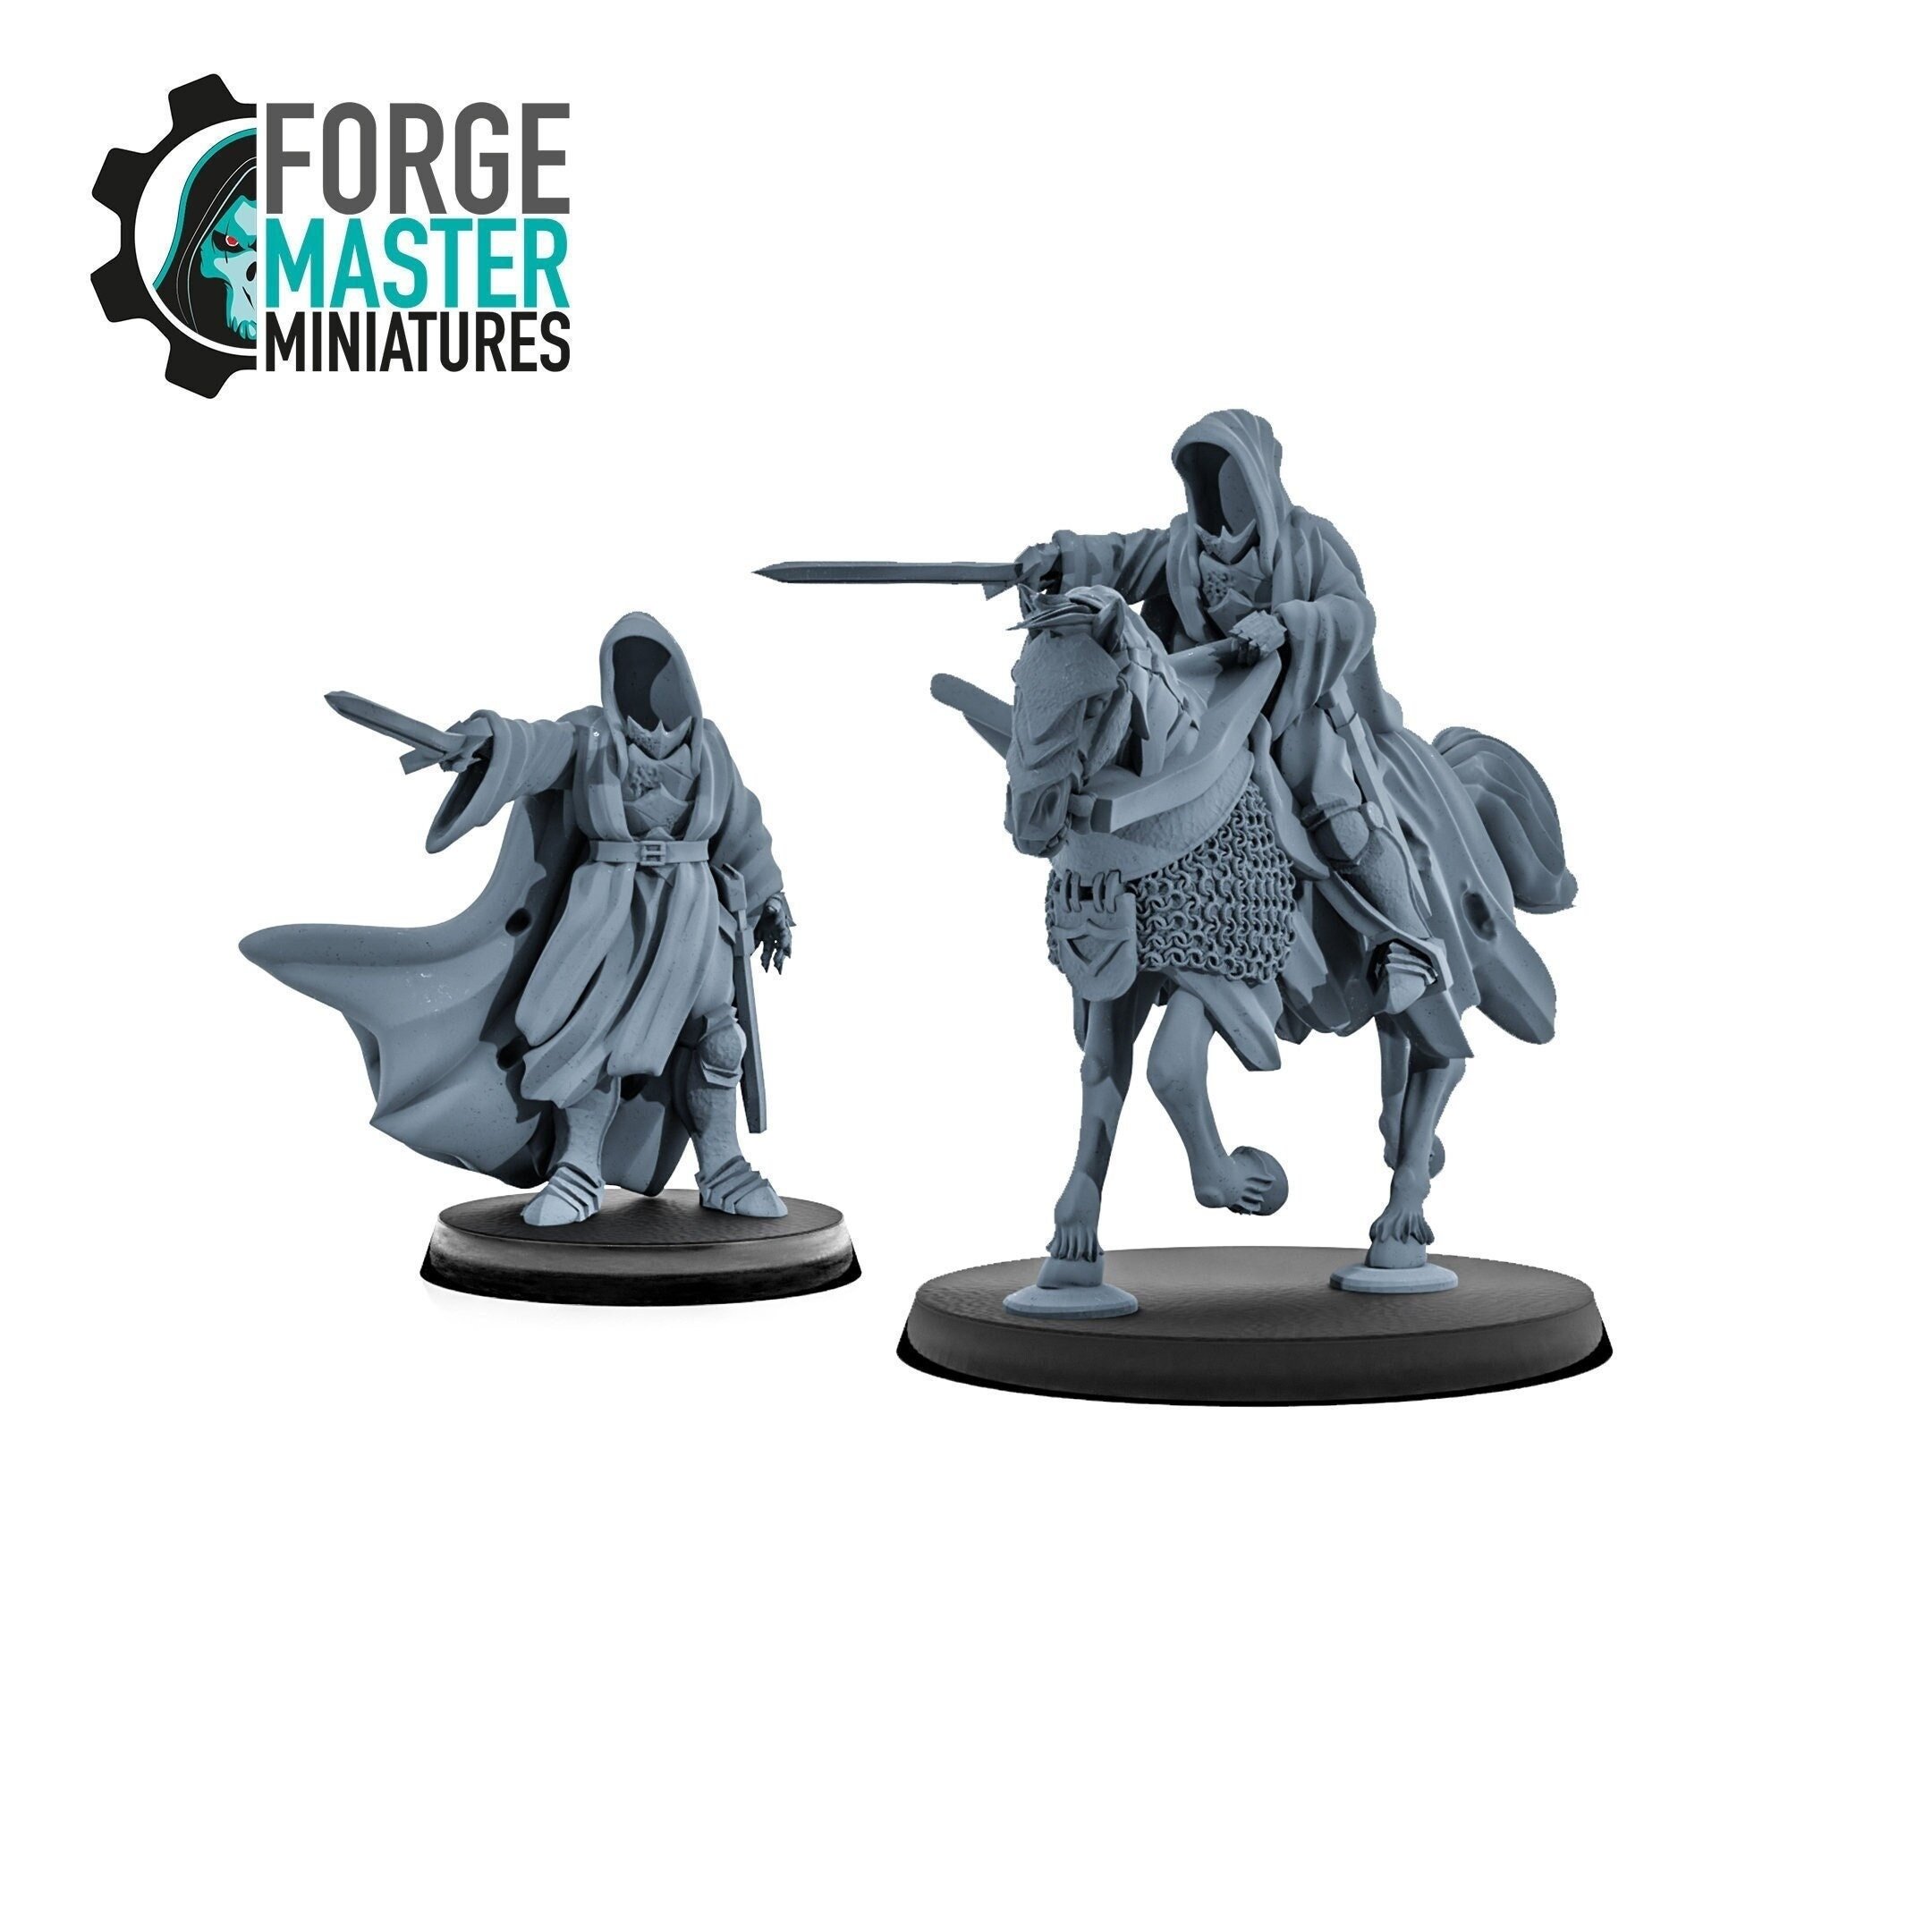 Southern Lord Wraith wargaming miniature by Kzk Minis 3D Printed by Forgemaster Miniatures